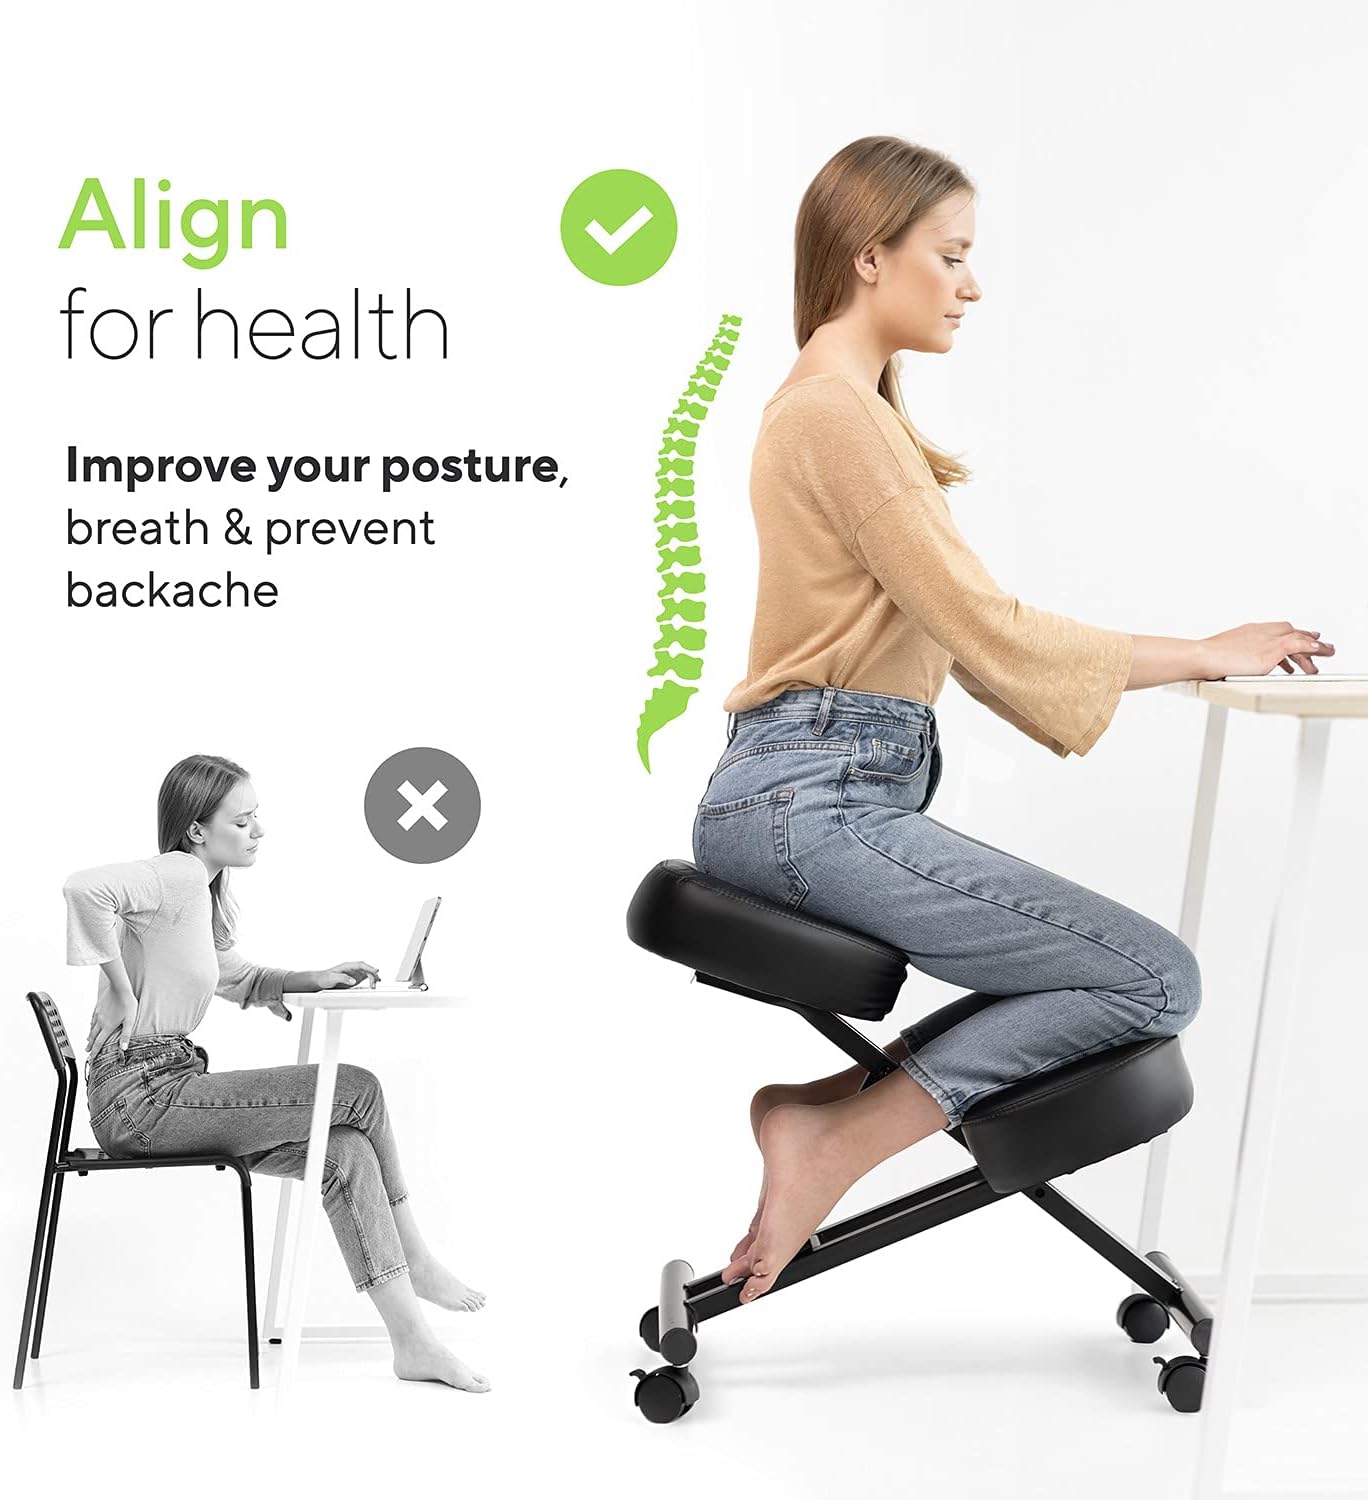 Luxton Home Ergonomic Kneeling Chair with Memory Foam Layer - $60